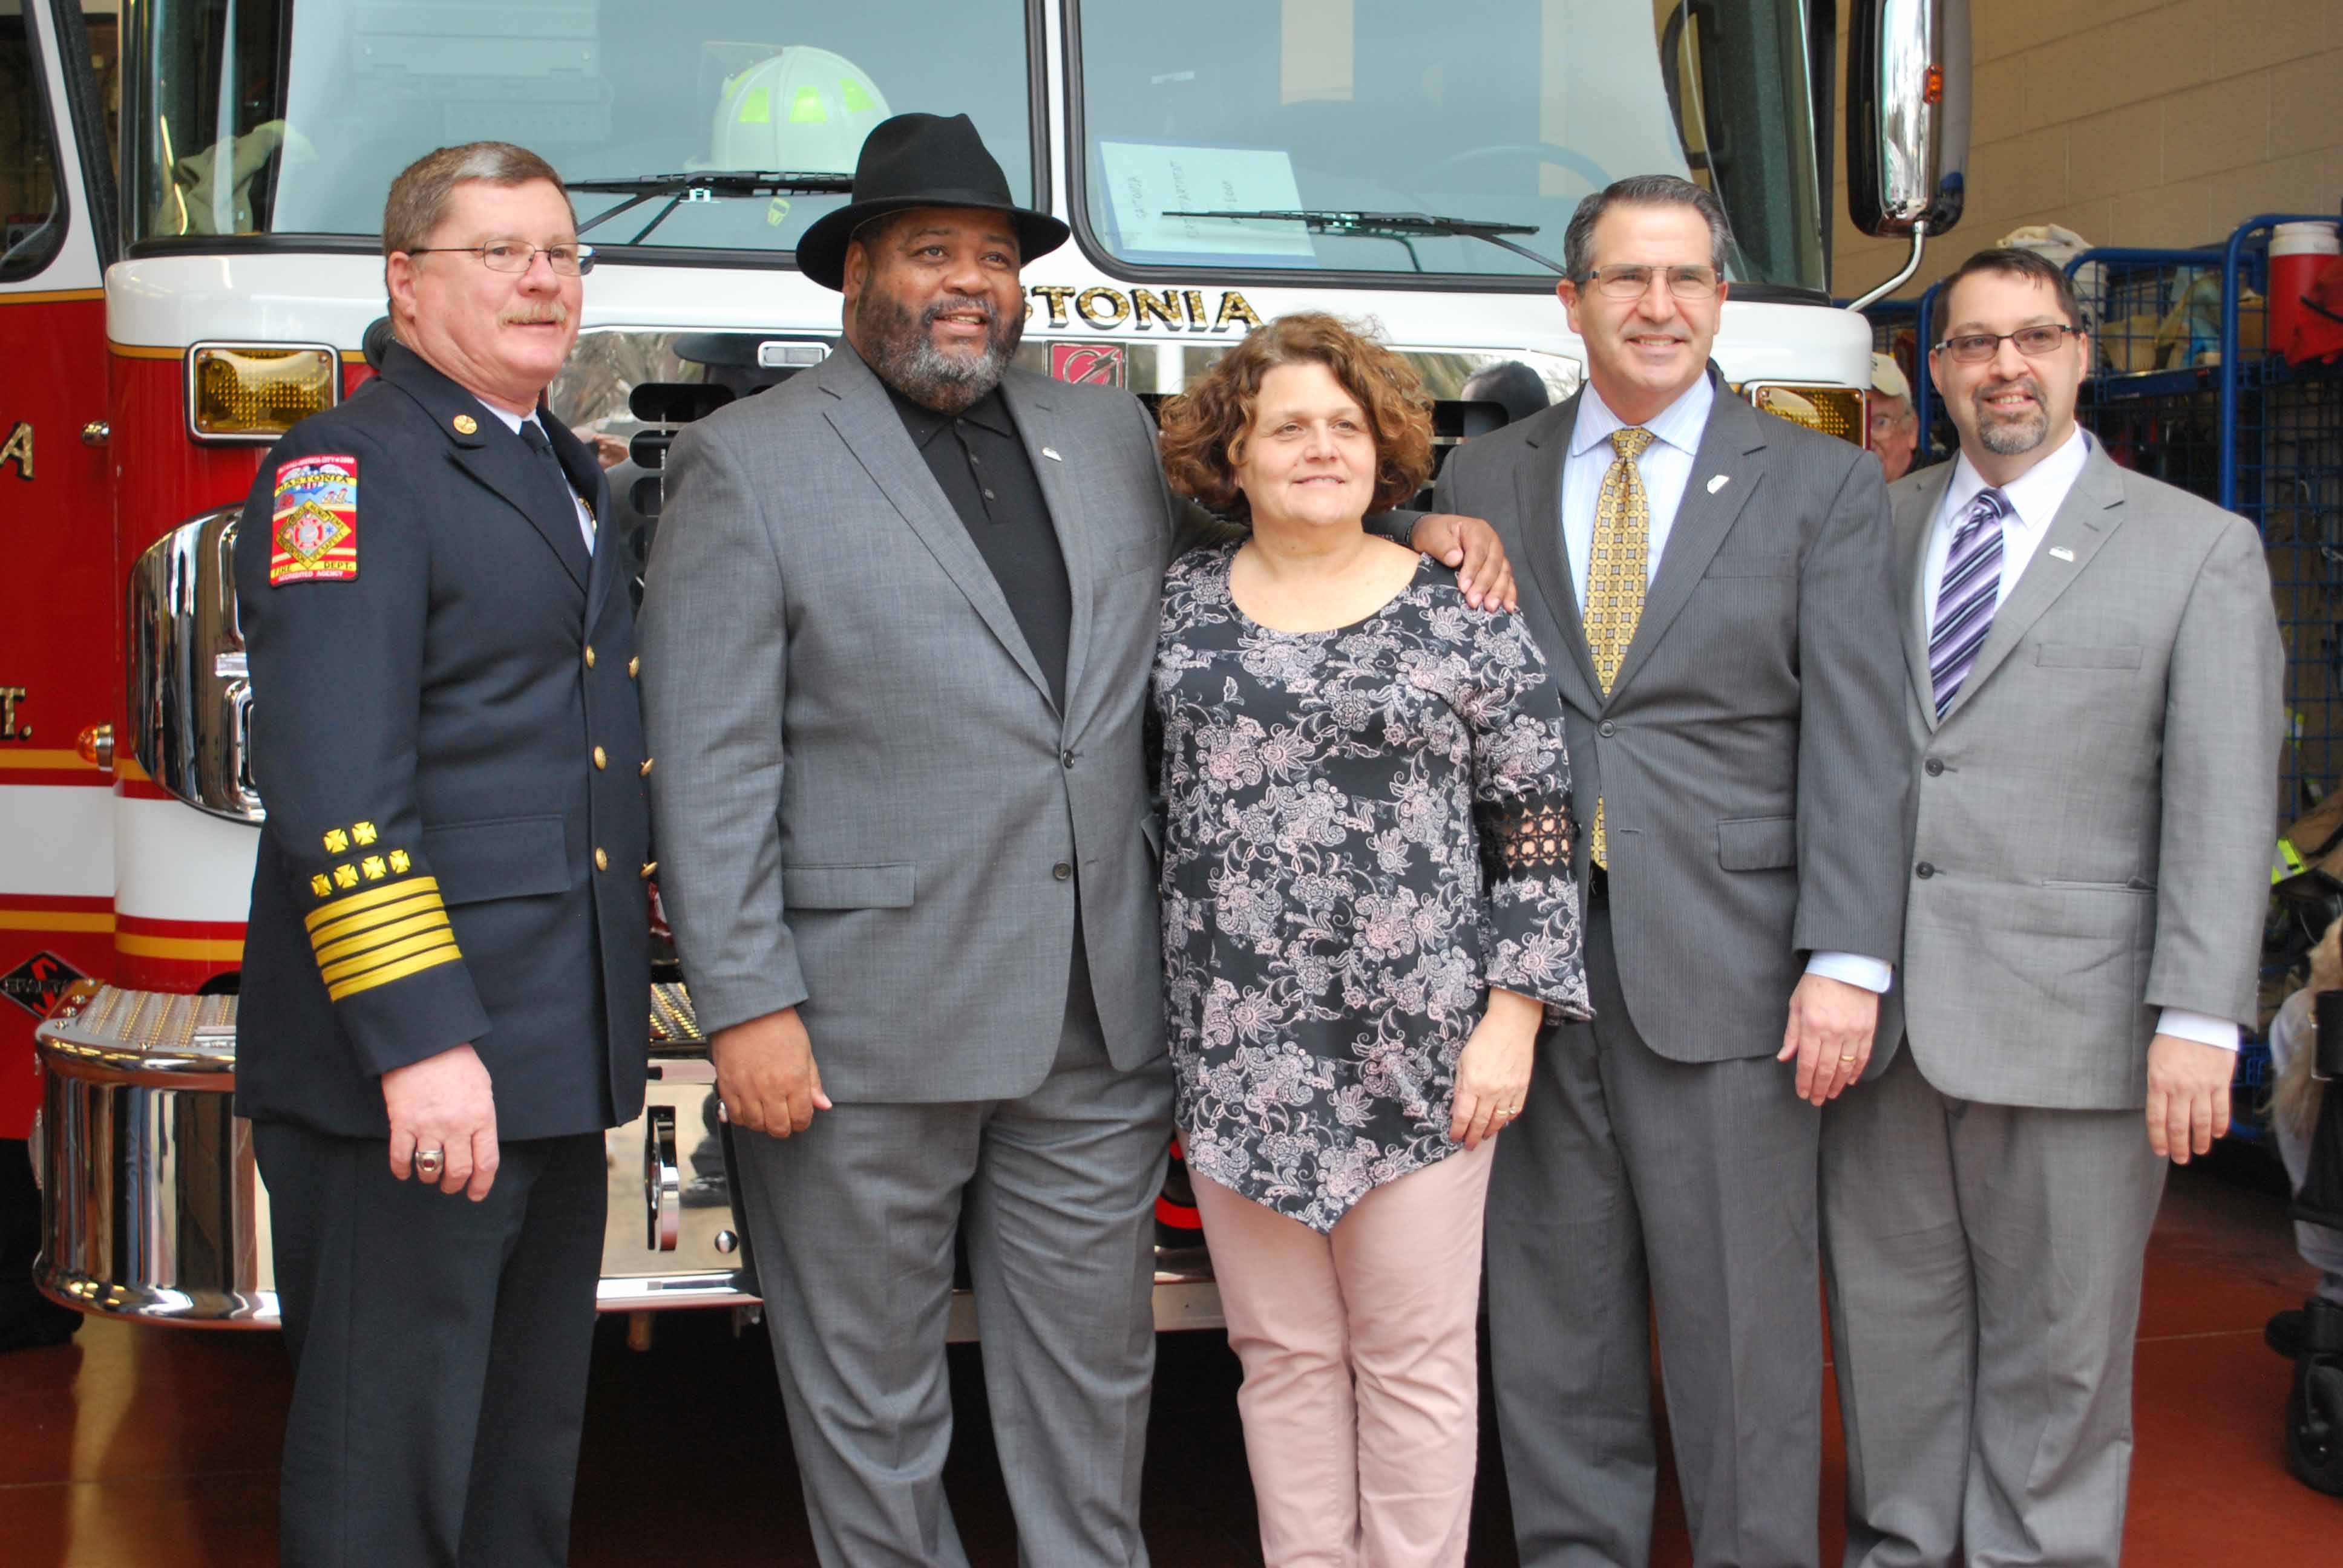 City officials pose for photos with the new fire truck